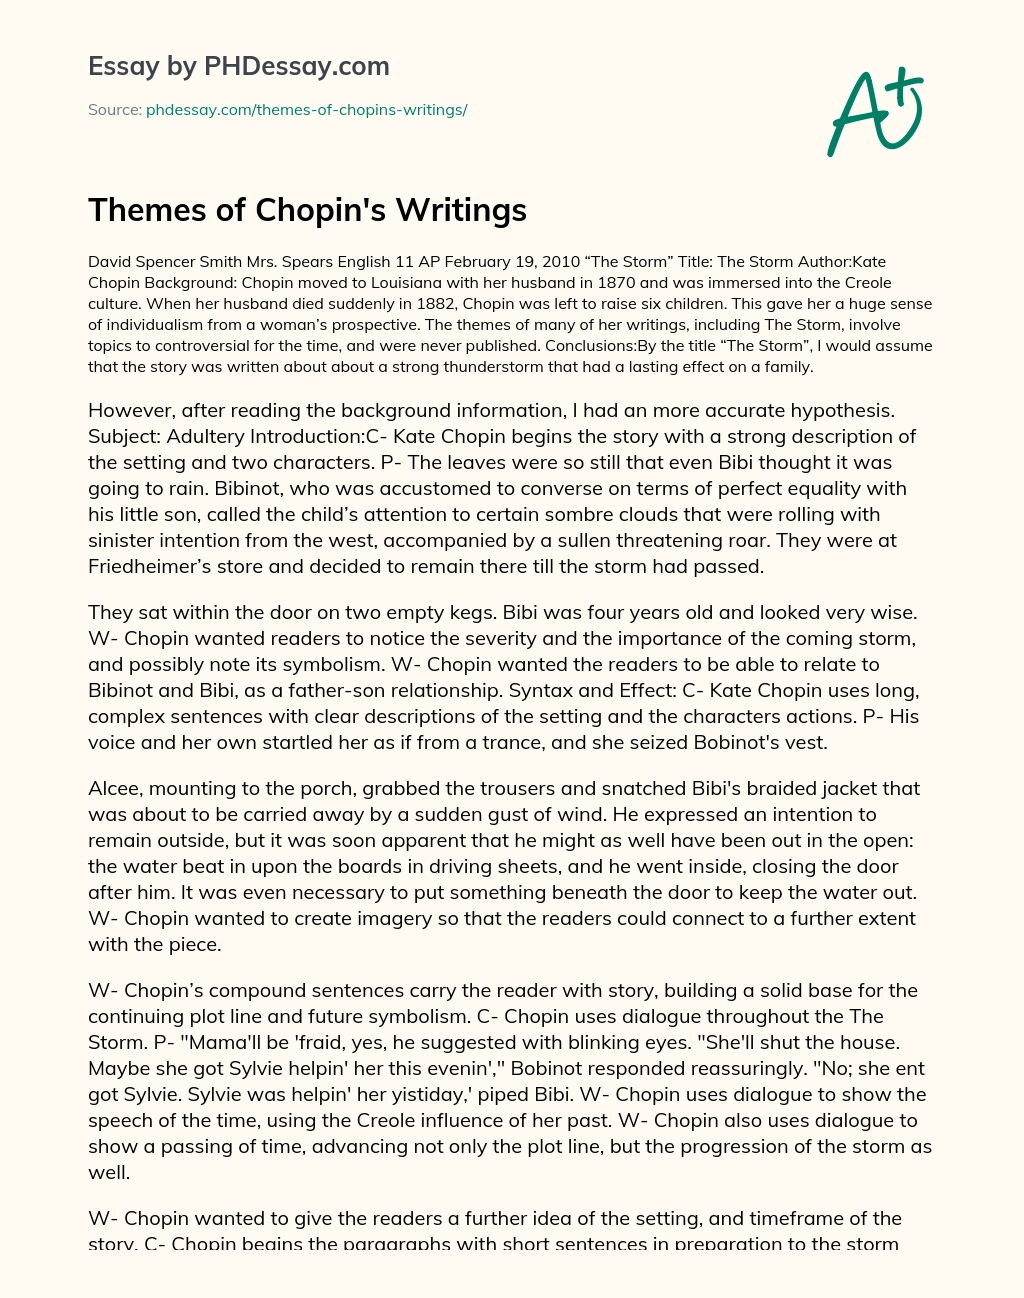 Themes of Chopin’s Writings essay